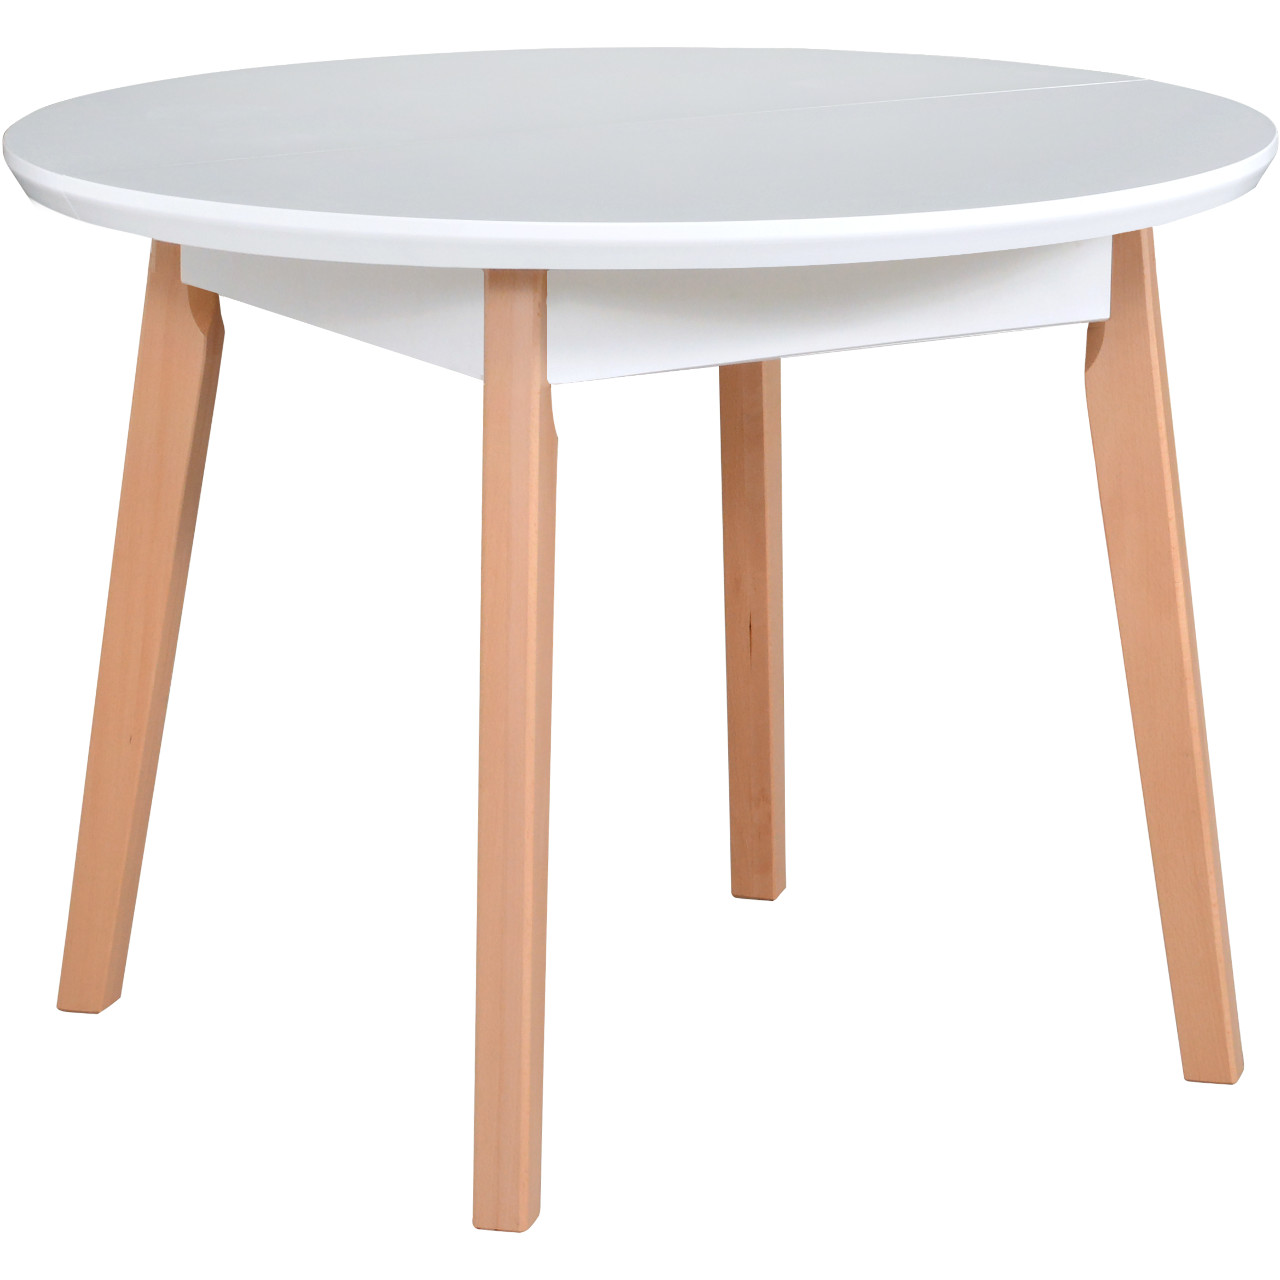 Table OSLO 4 100x100/130 white MDF / beech natural